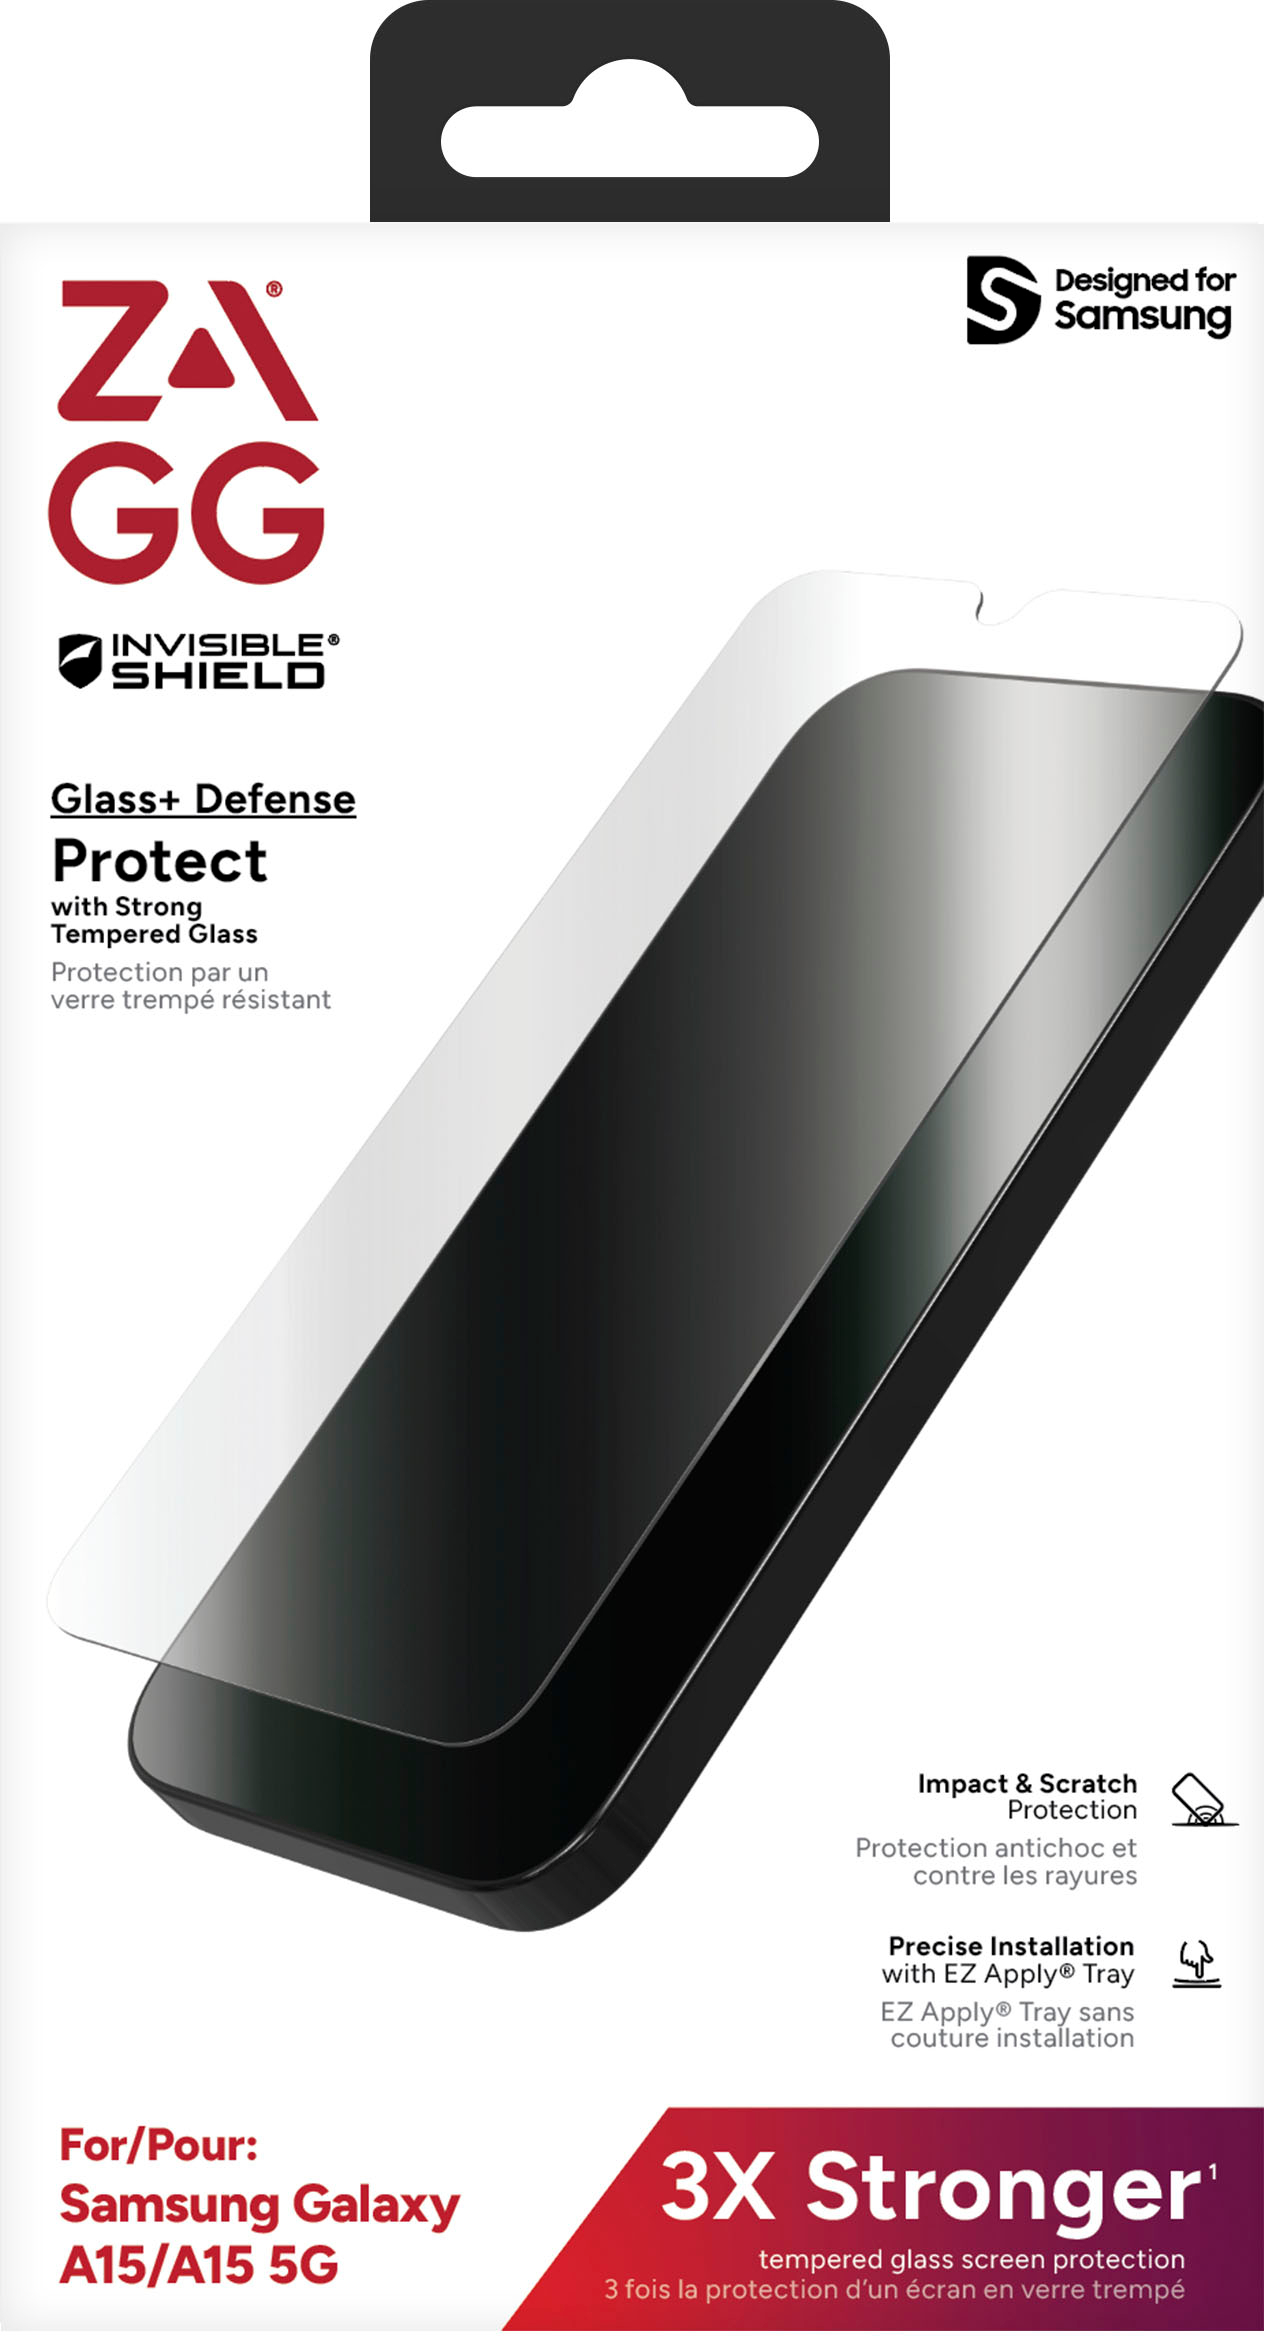 ZAGG InvisibleShield Glass+ Defense Screen Protector for Samsung Galaxy A15/ A15 5G Clear 200113480 - Best Buy